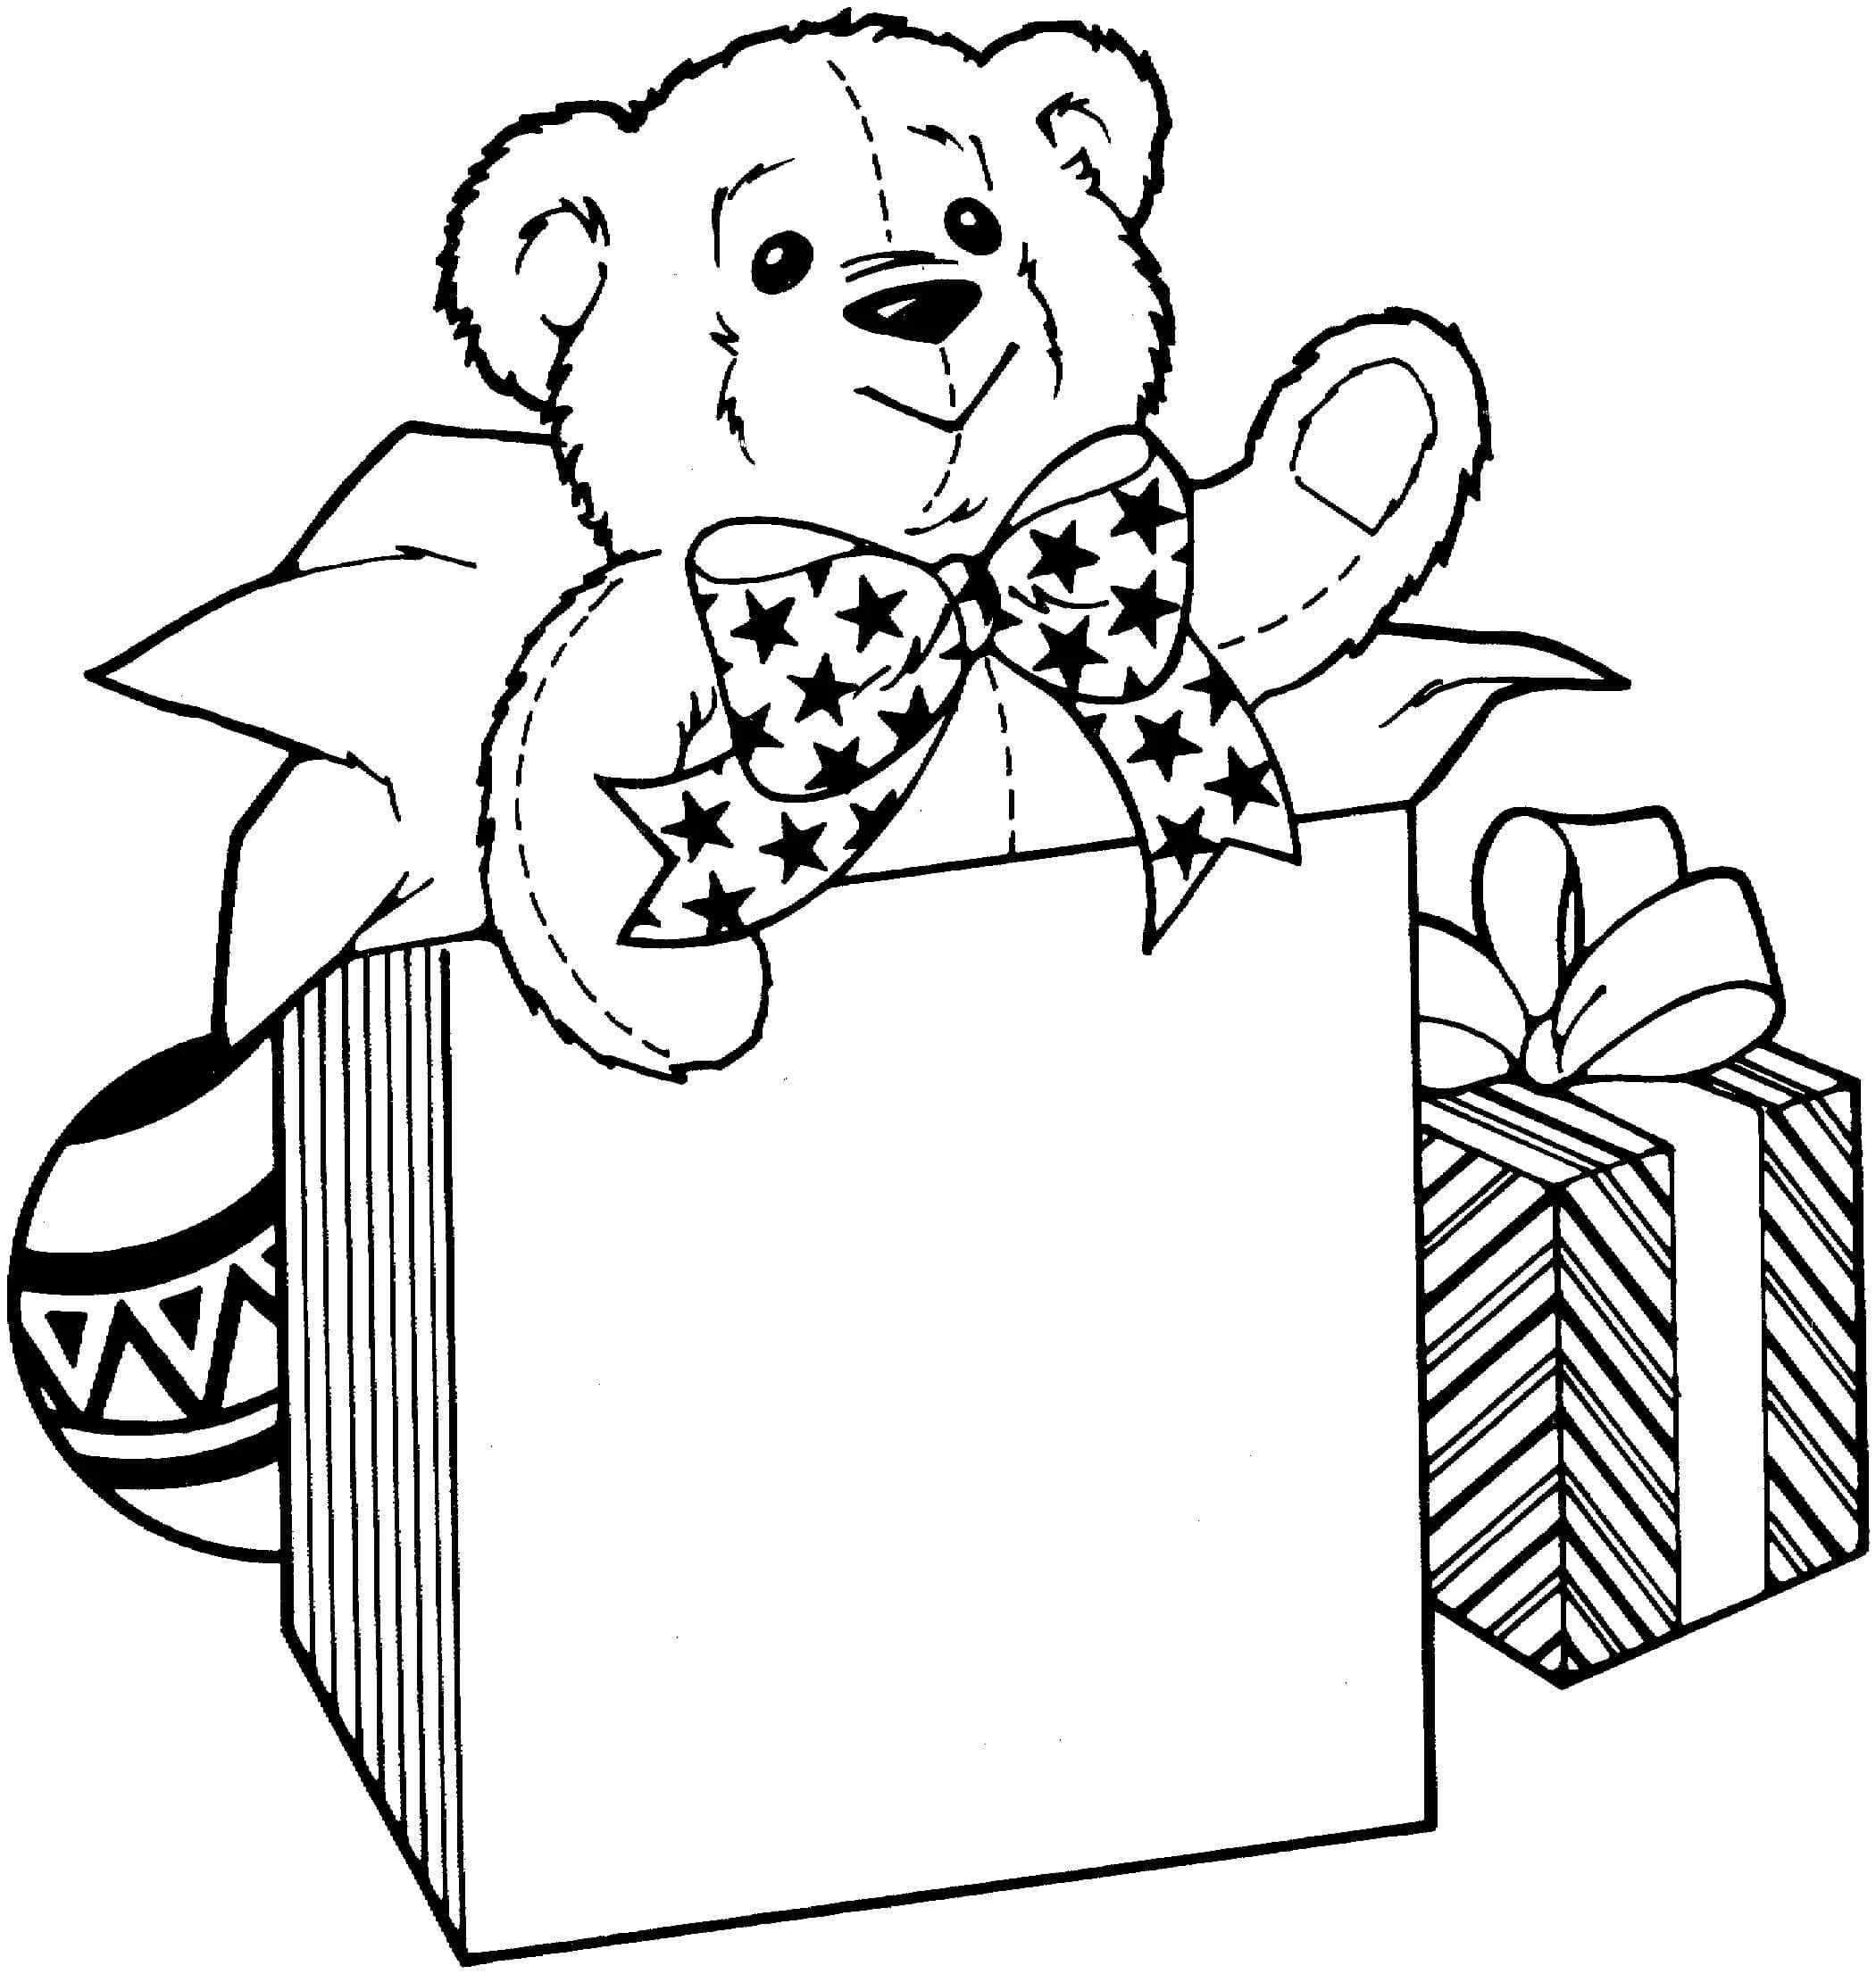 New Year Gift Is Teddy Coloring Page